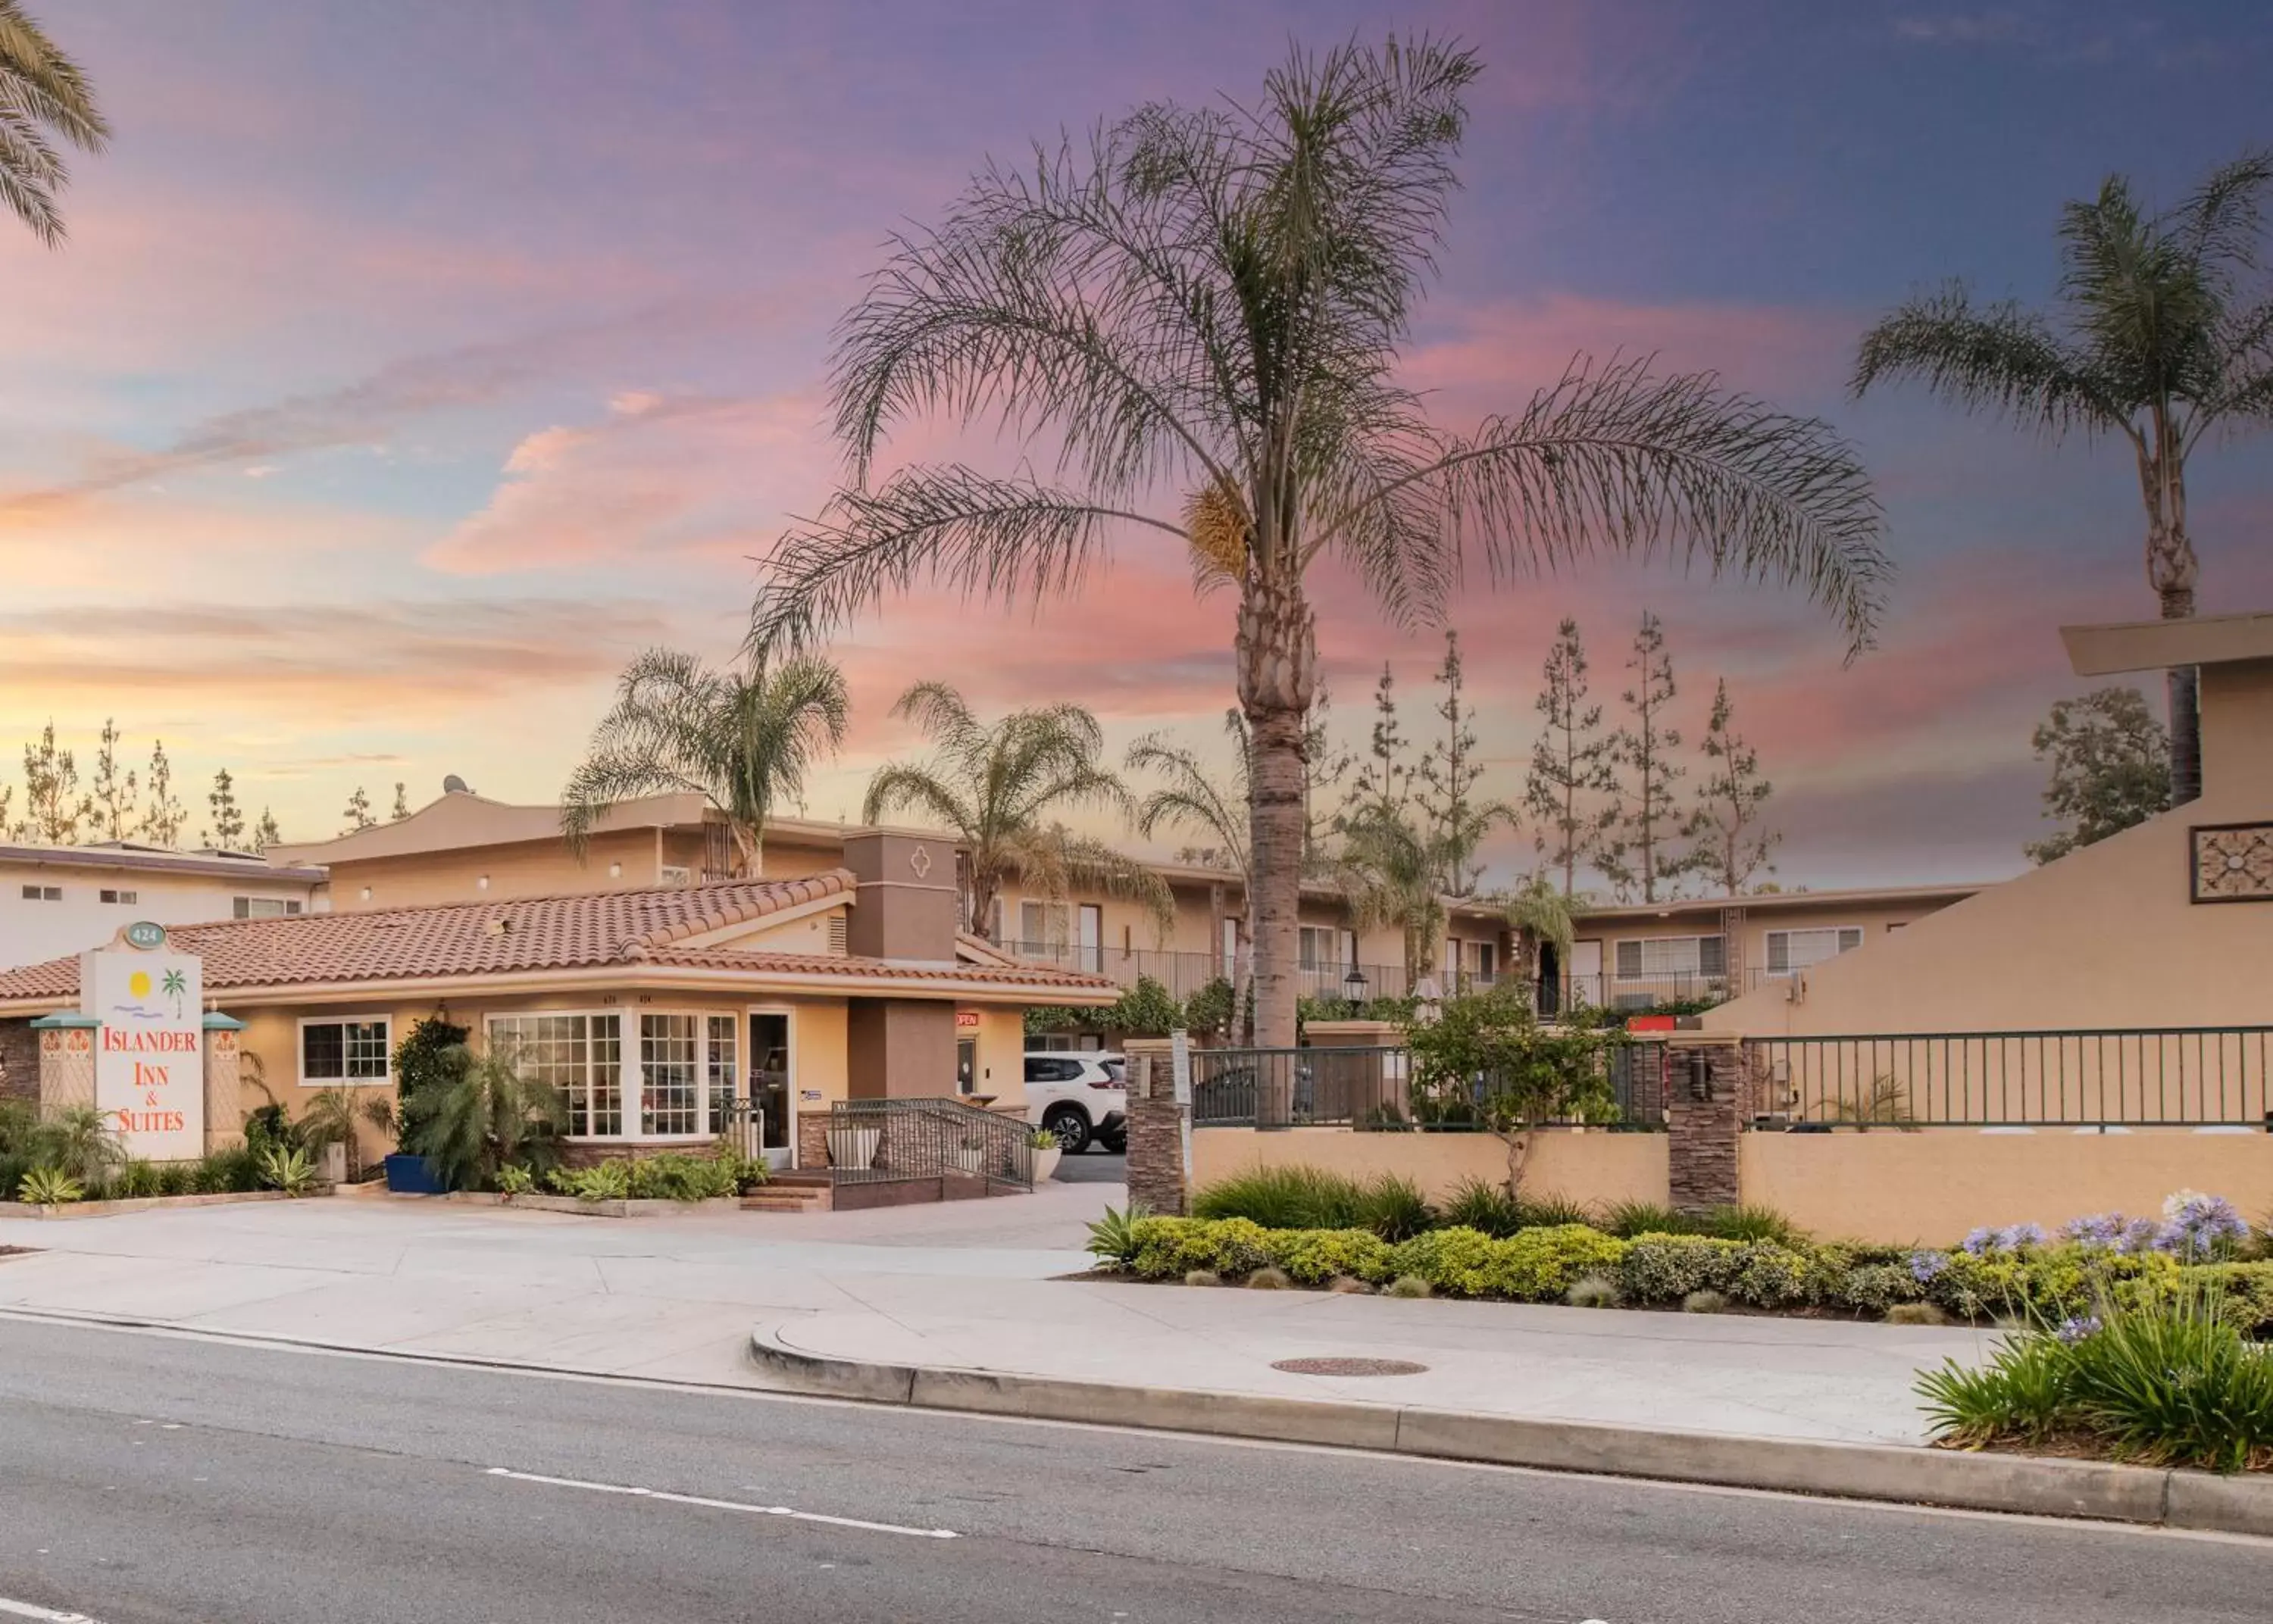 Property Building in Anaheim Islander Inn and Suites